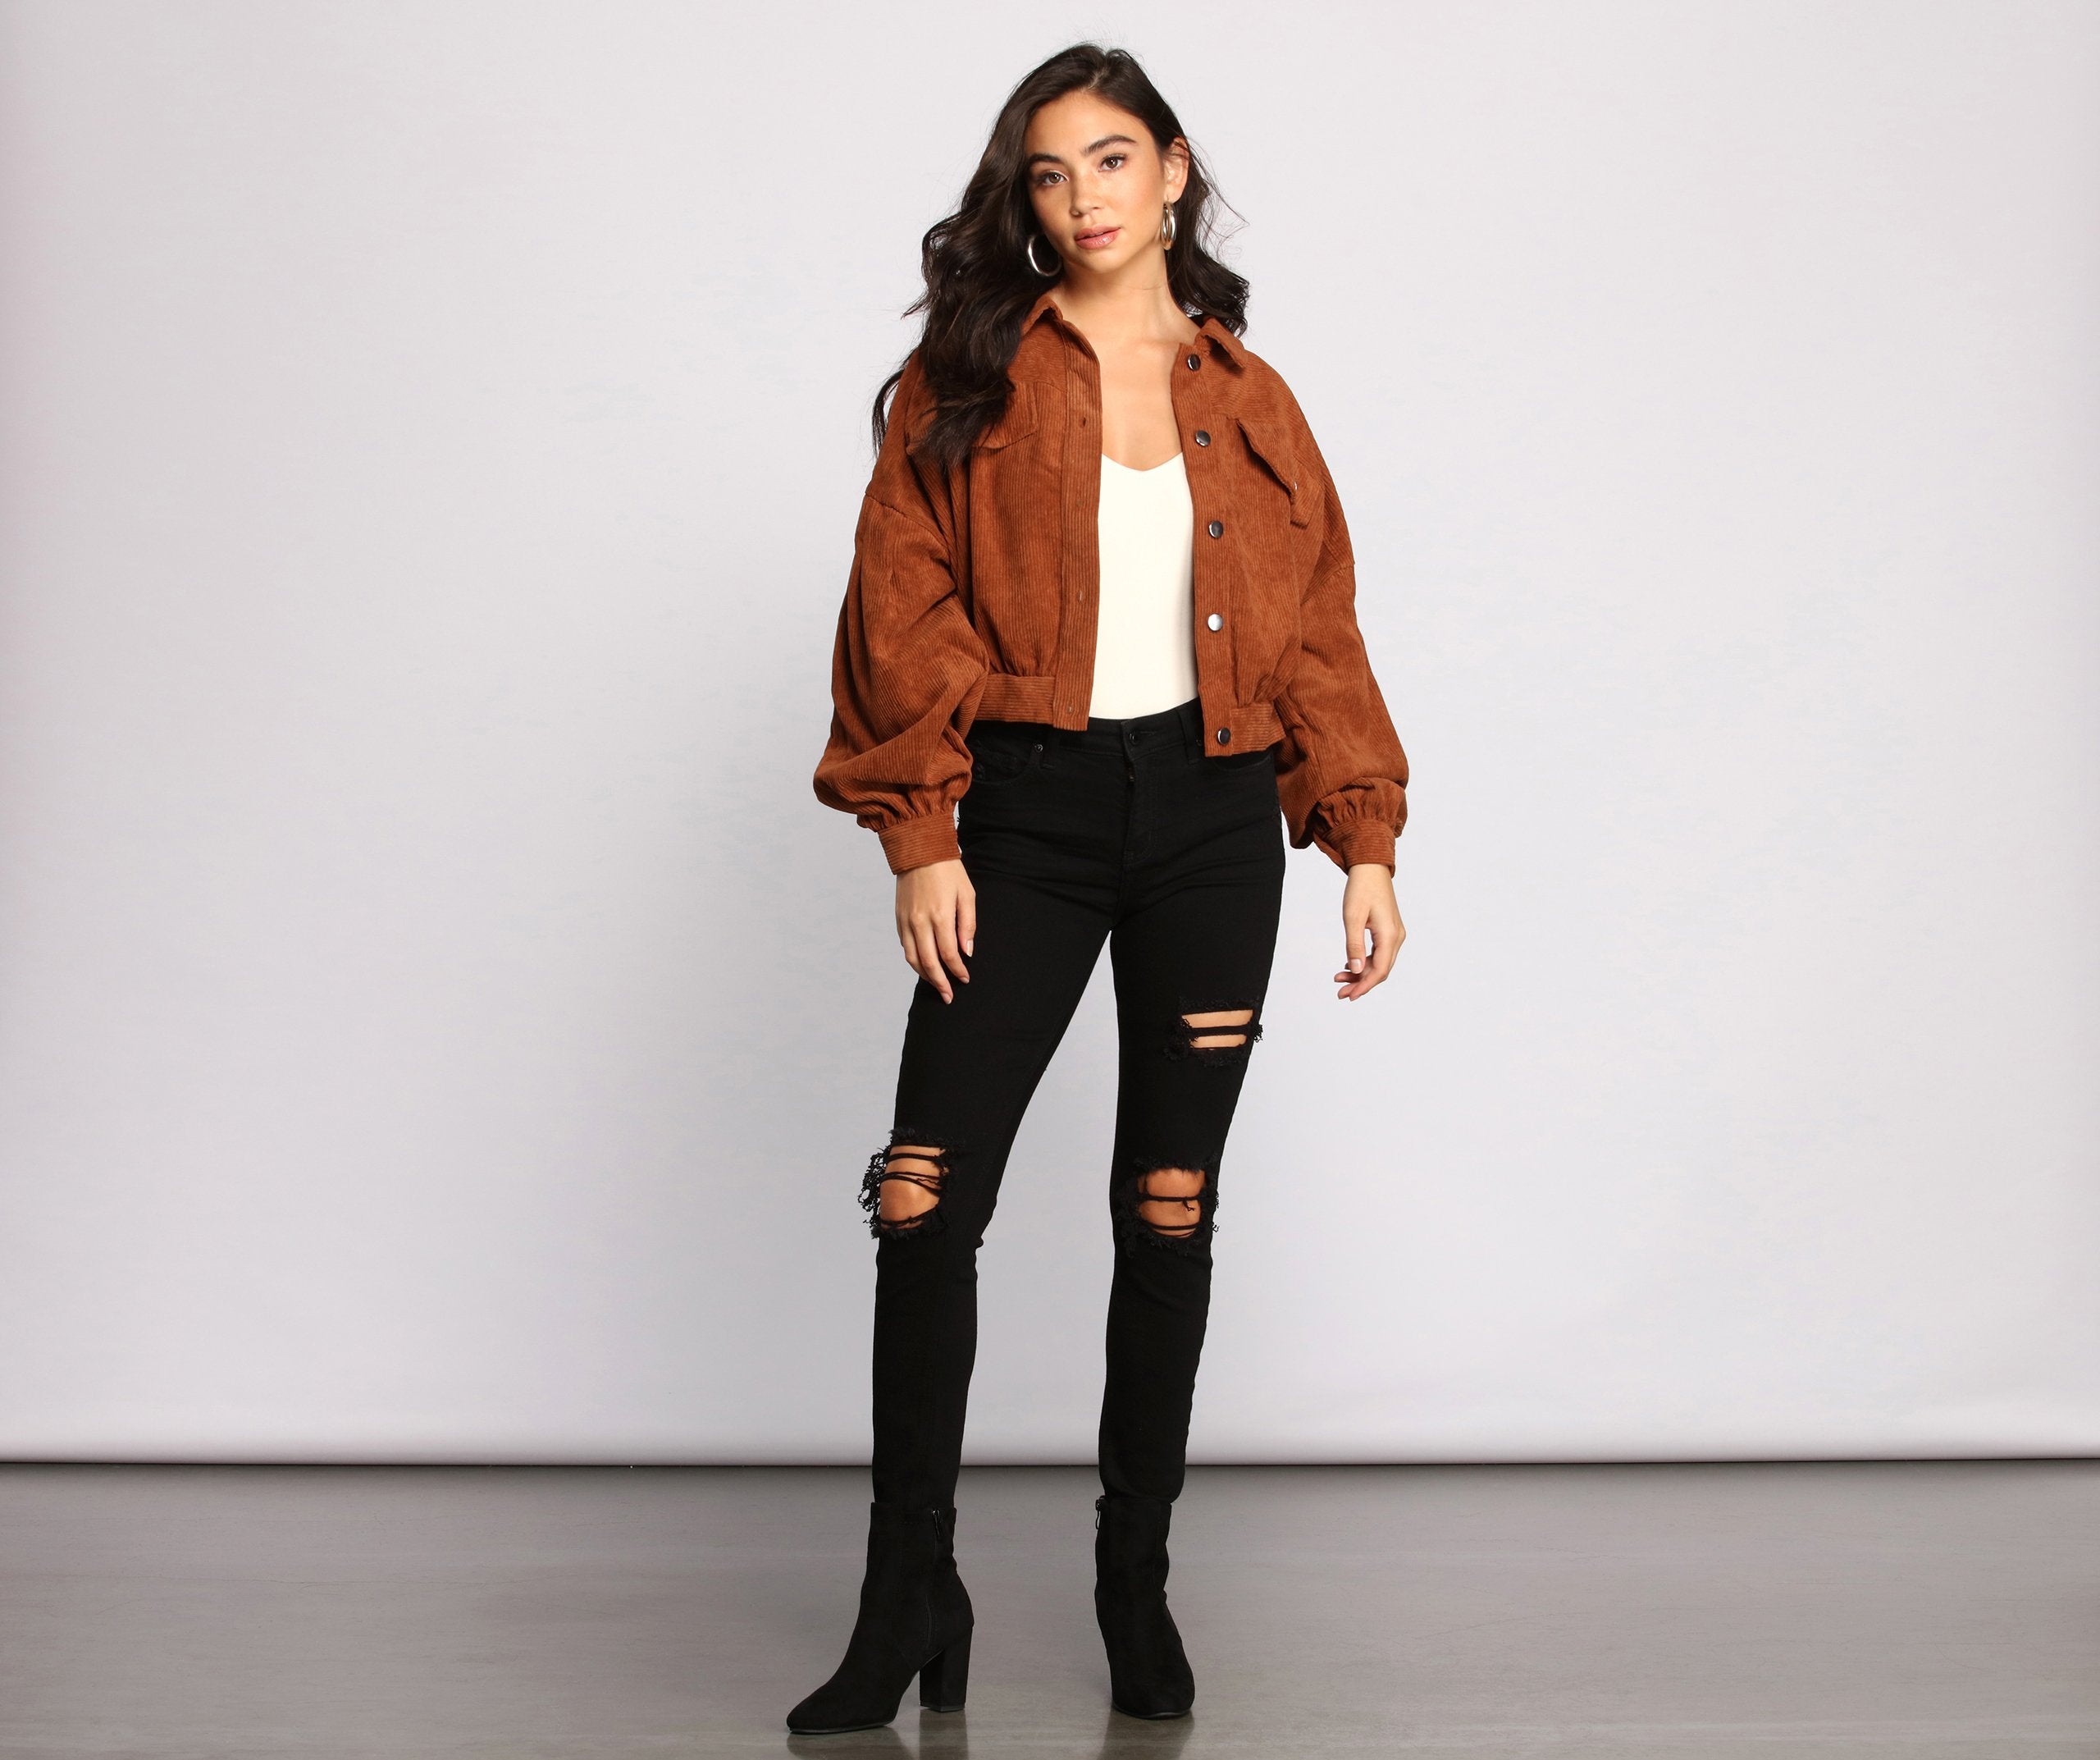 Casually Cute Button-Front Corduroy Jacket - Lady Occasions